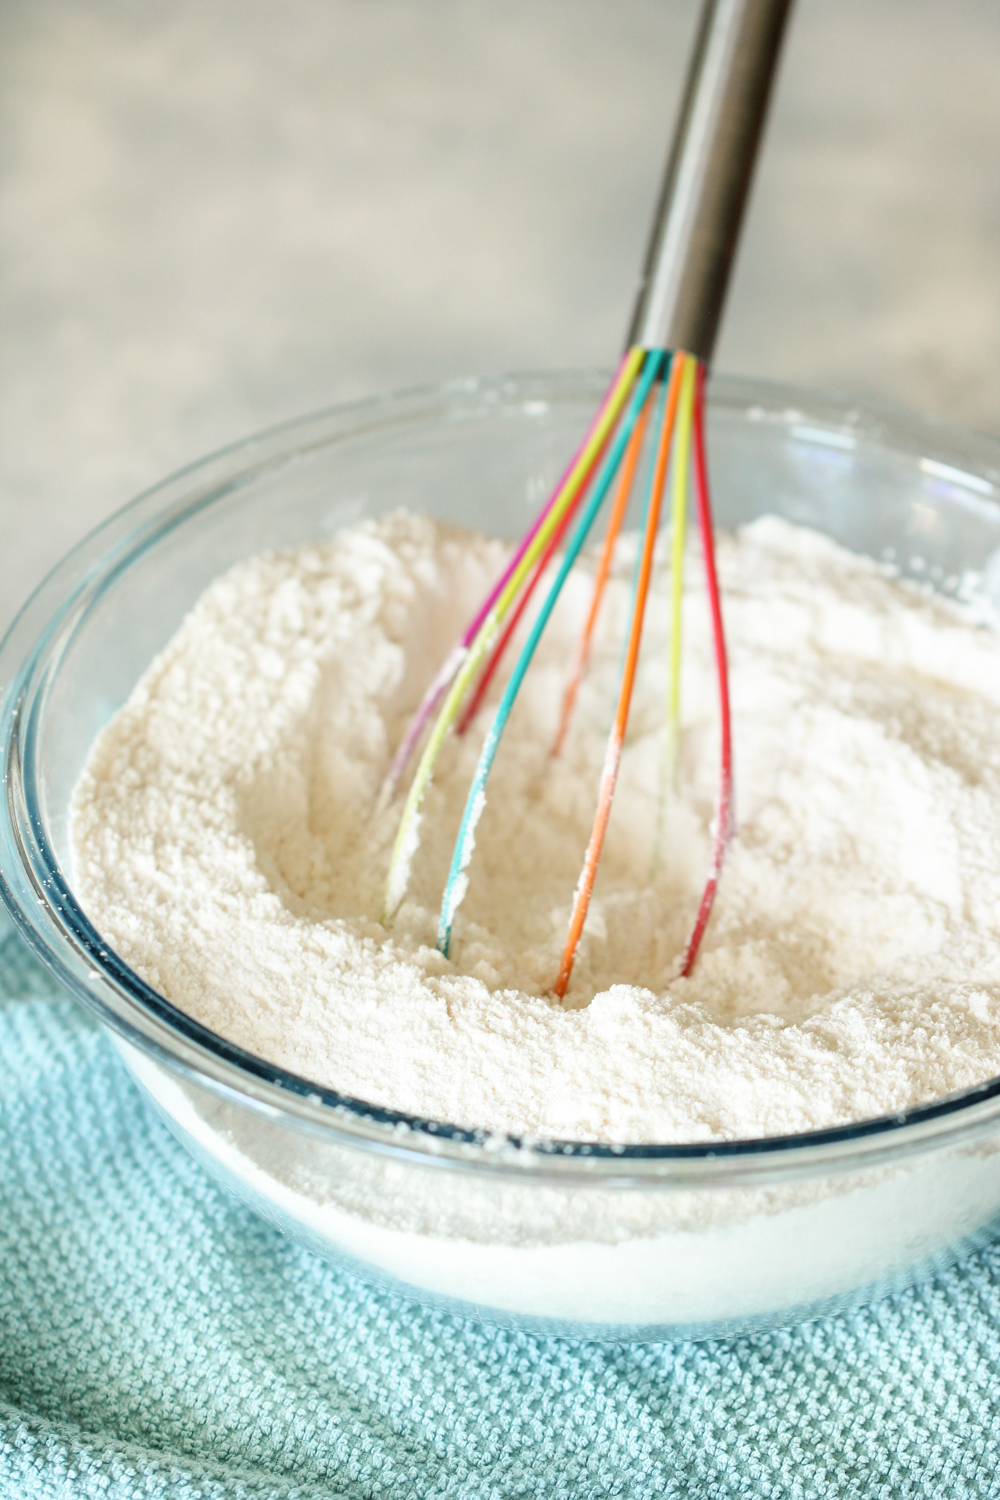 Flour mixture combined in a mixing bowl with a whisk